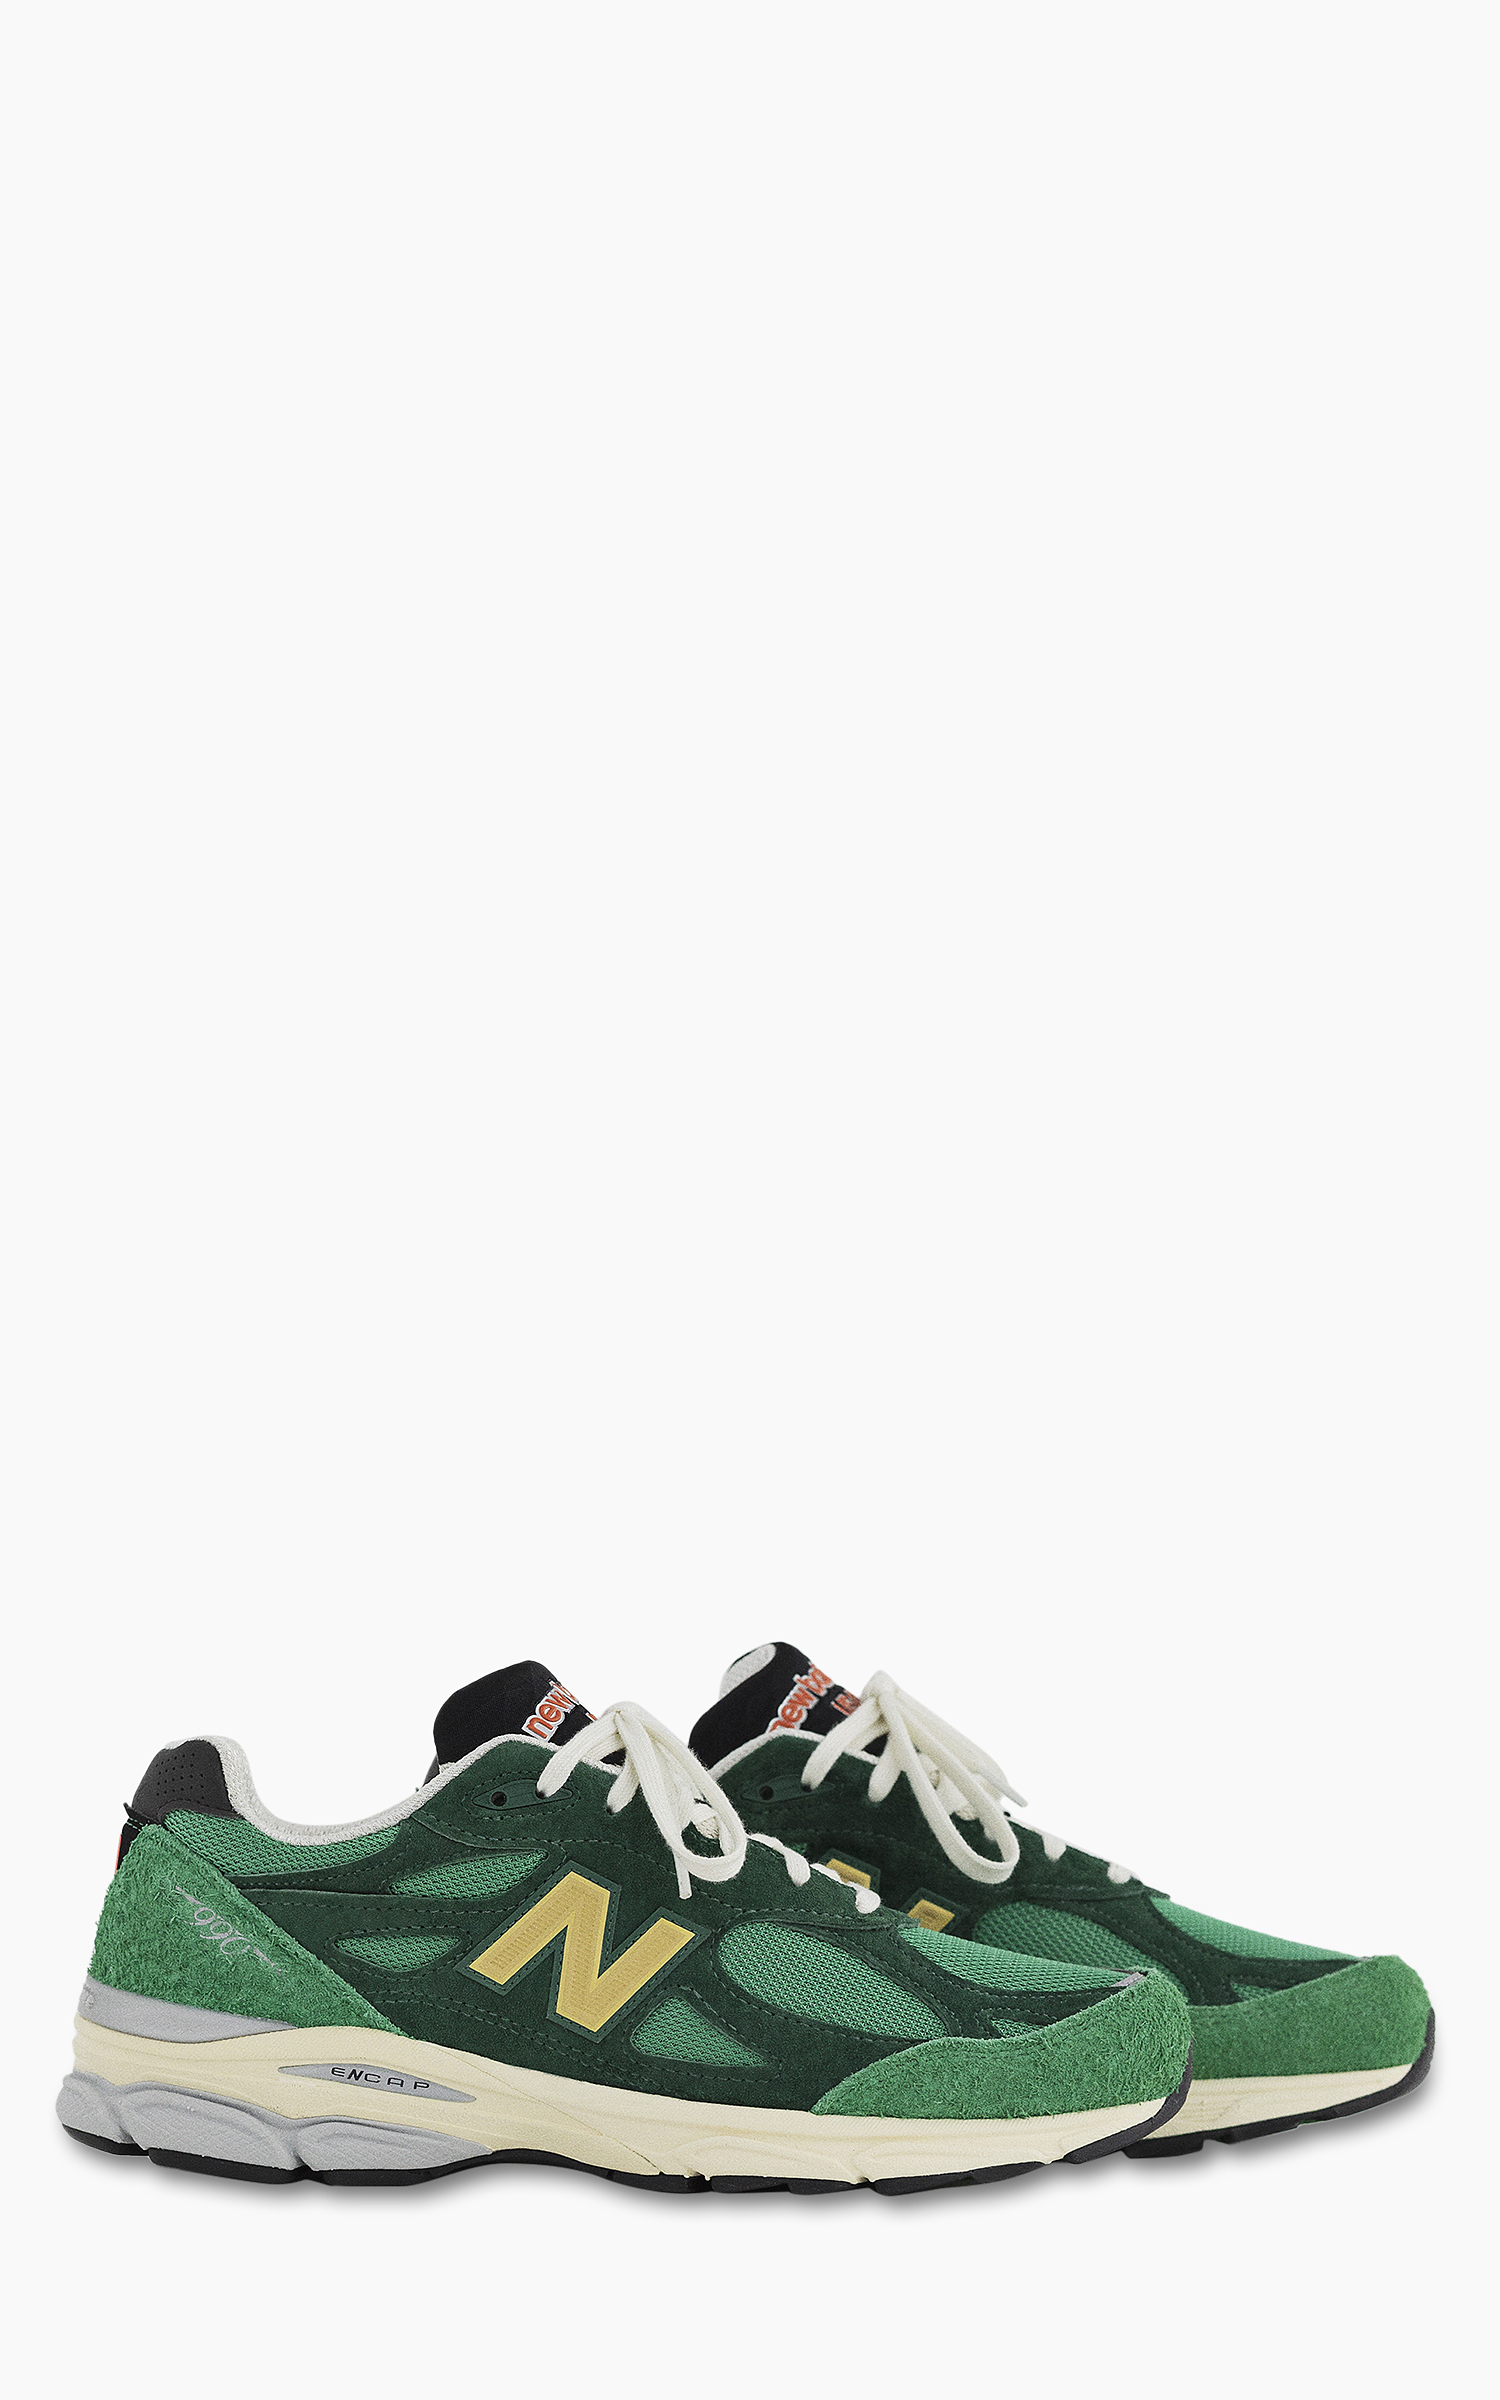 New Balance M990 GG3 Green/Gold "Made in USA" | Cultizm